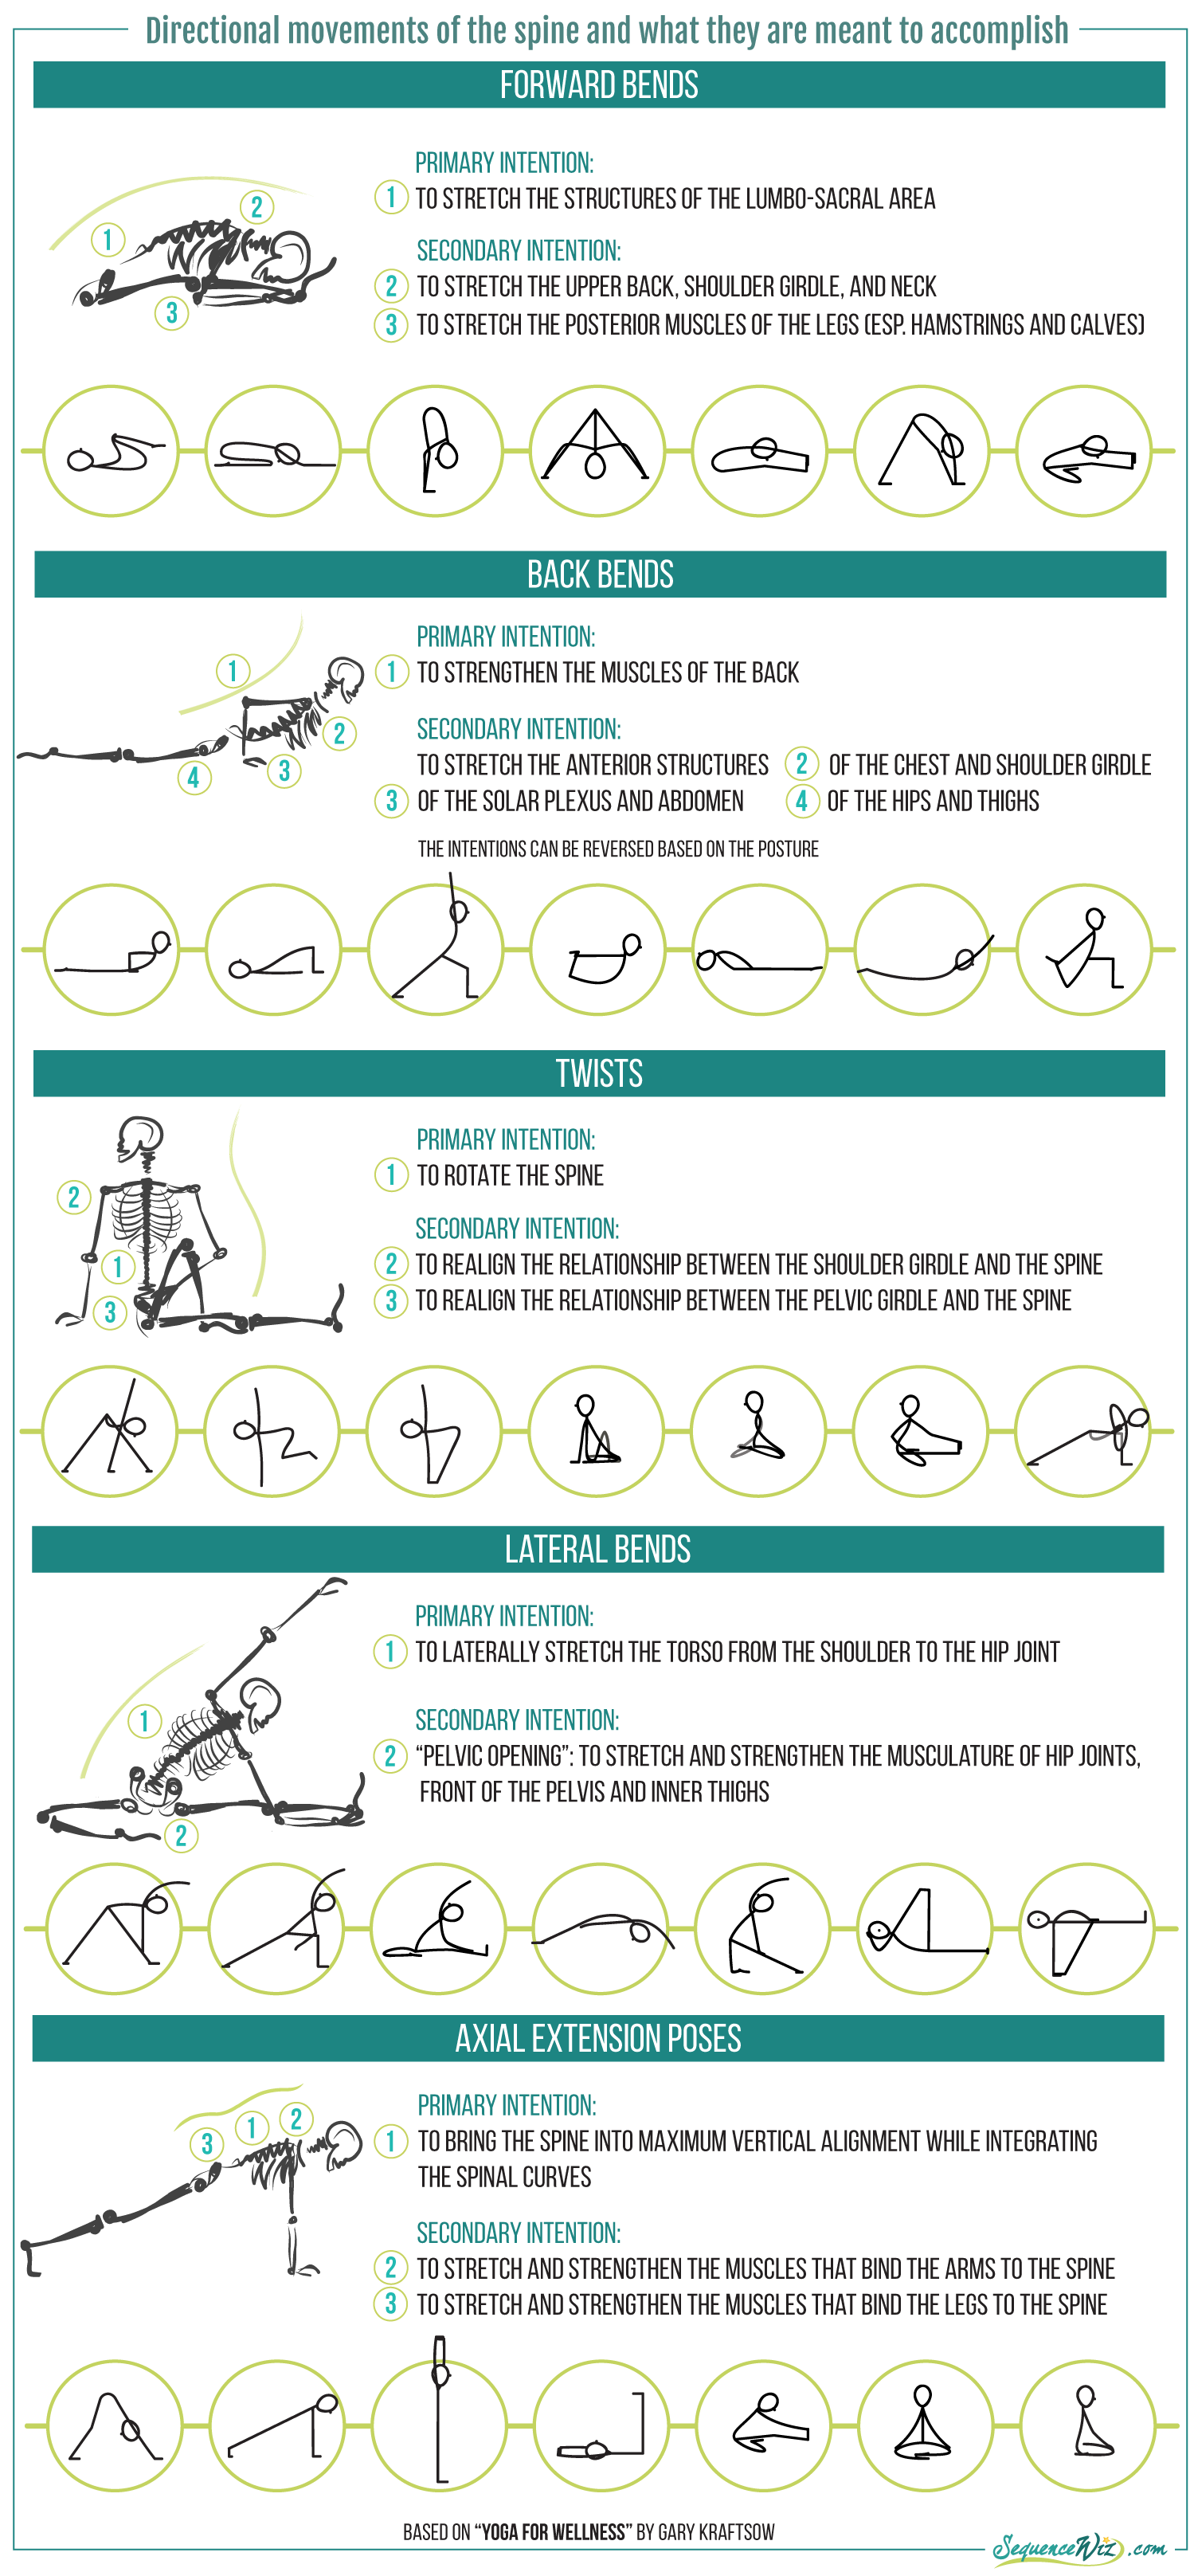 Directional movement of the spine infogr